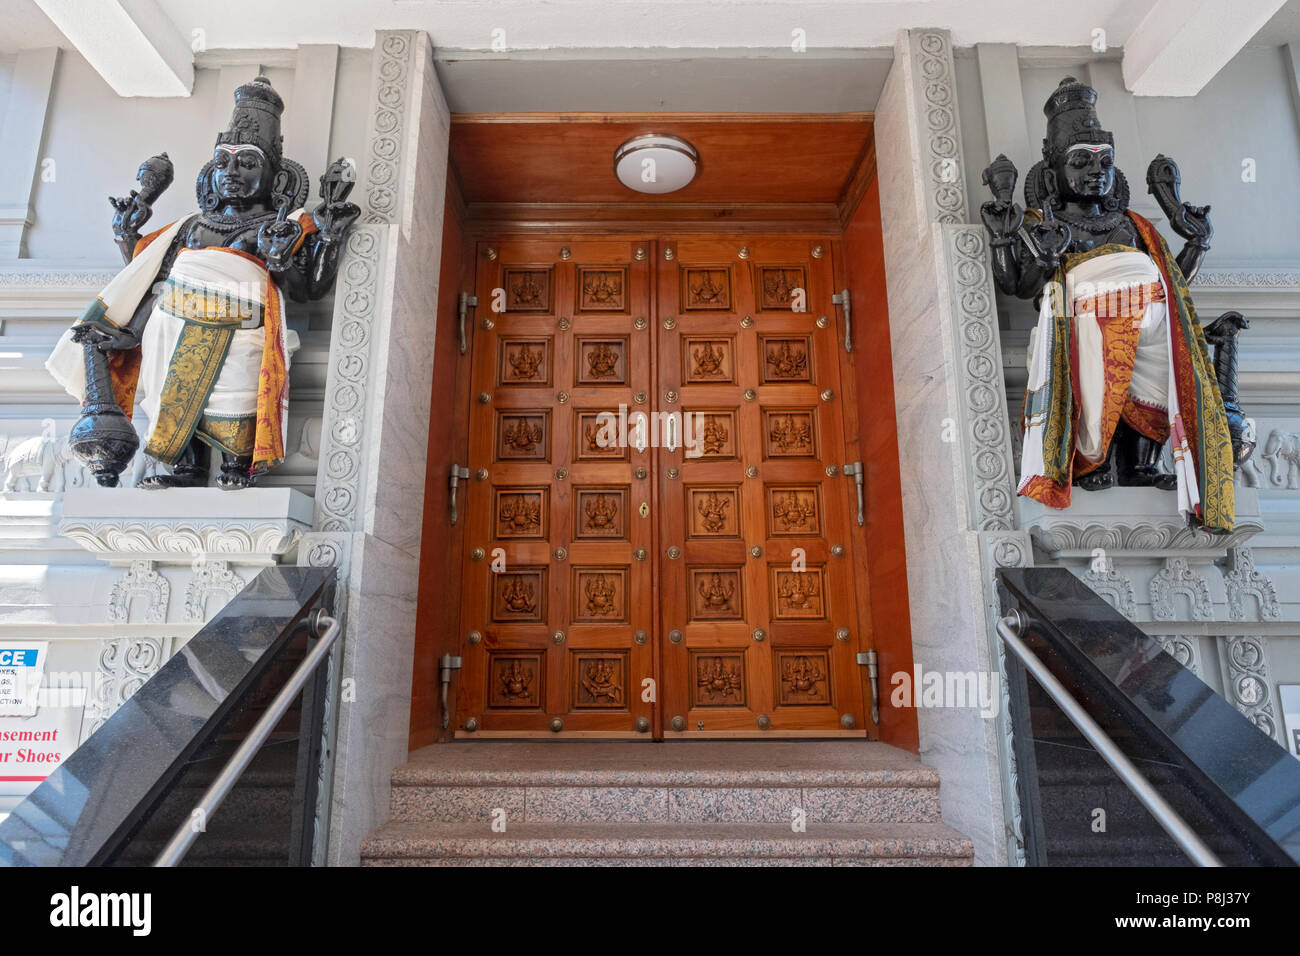 An ornate wooden door and statues at an entrance to the Hindu Temple Society in Flushing, Queens, New York City. Stock Photo